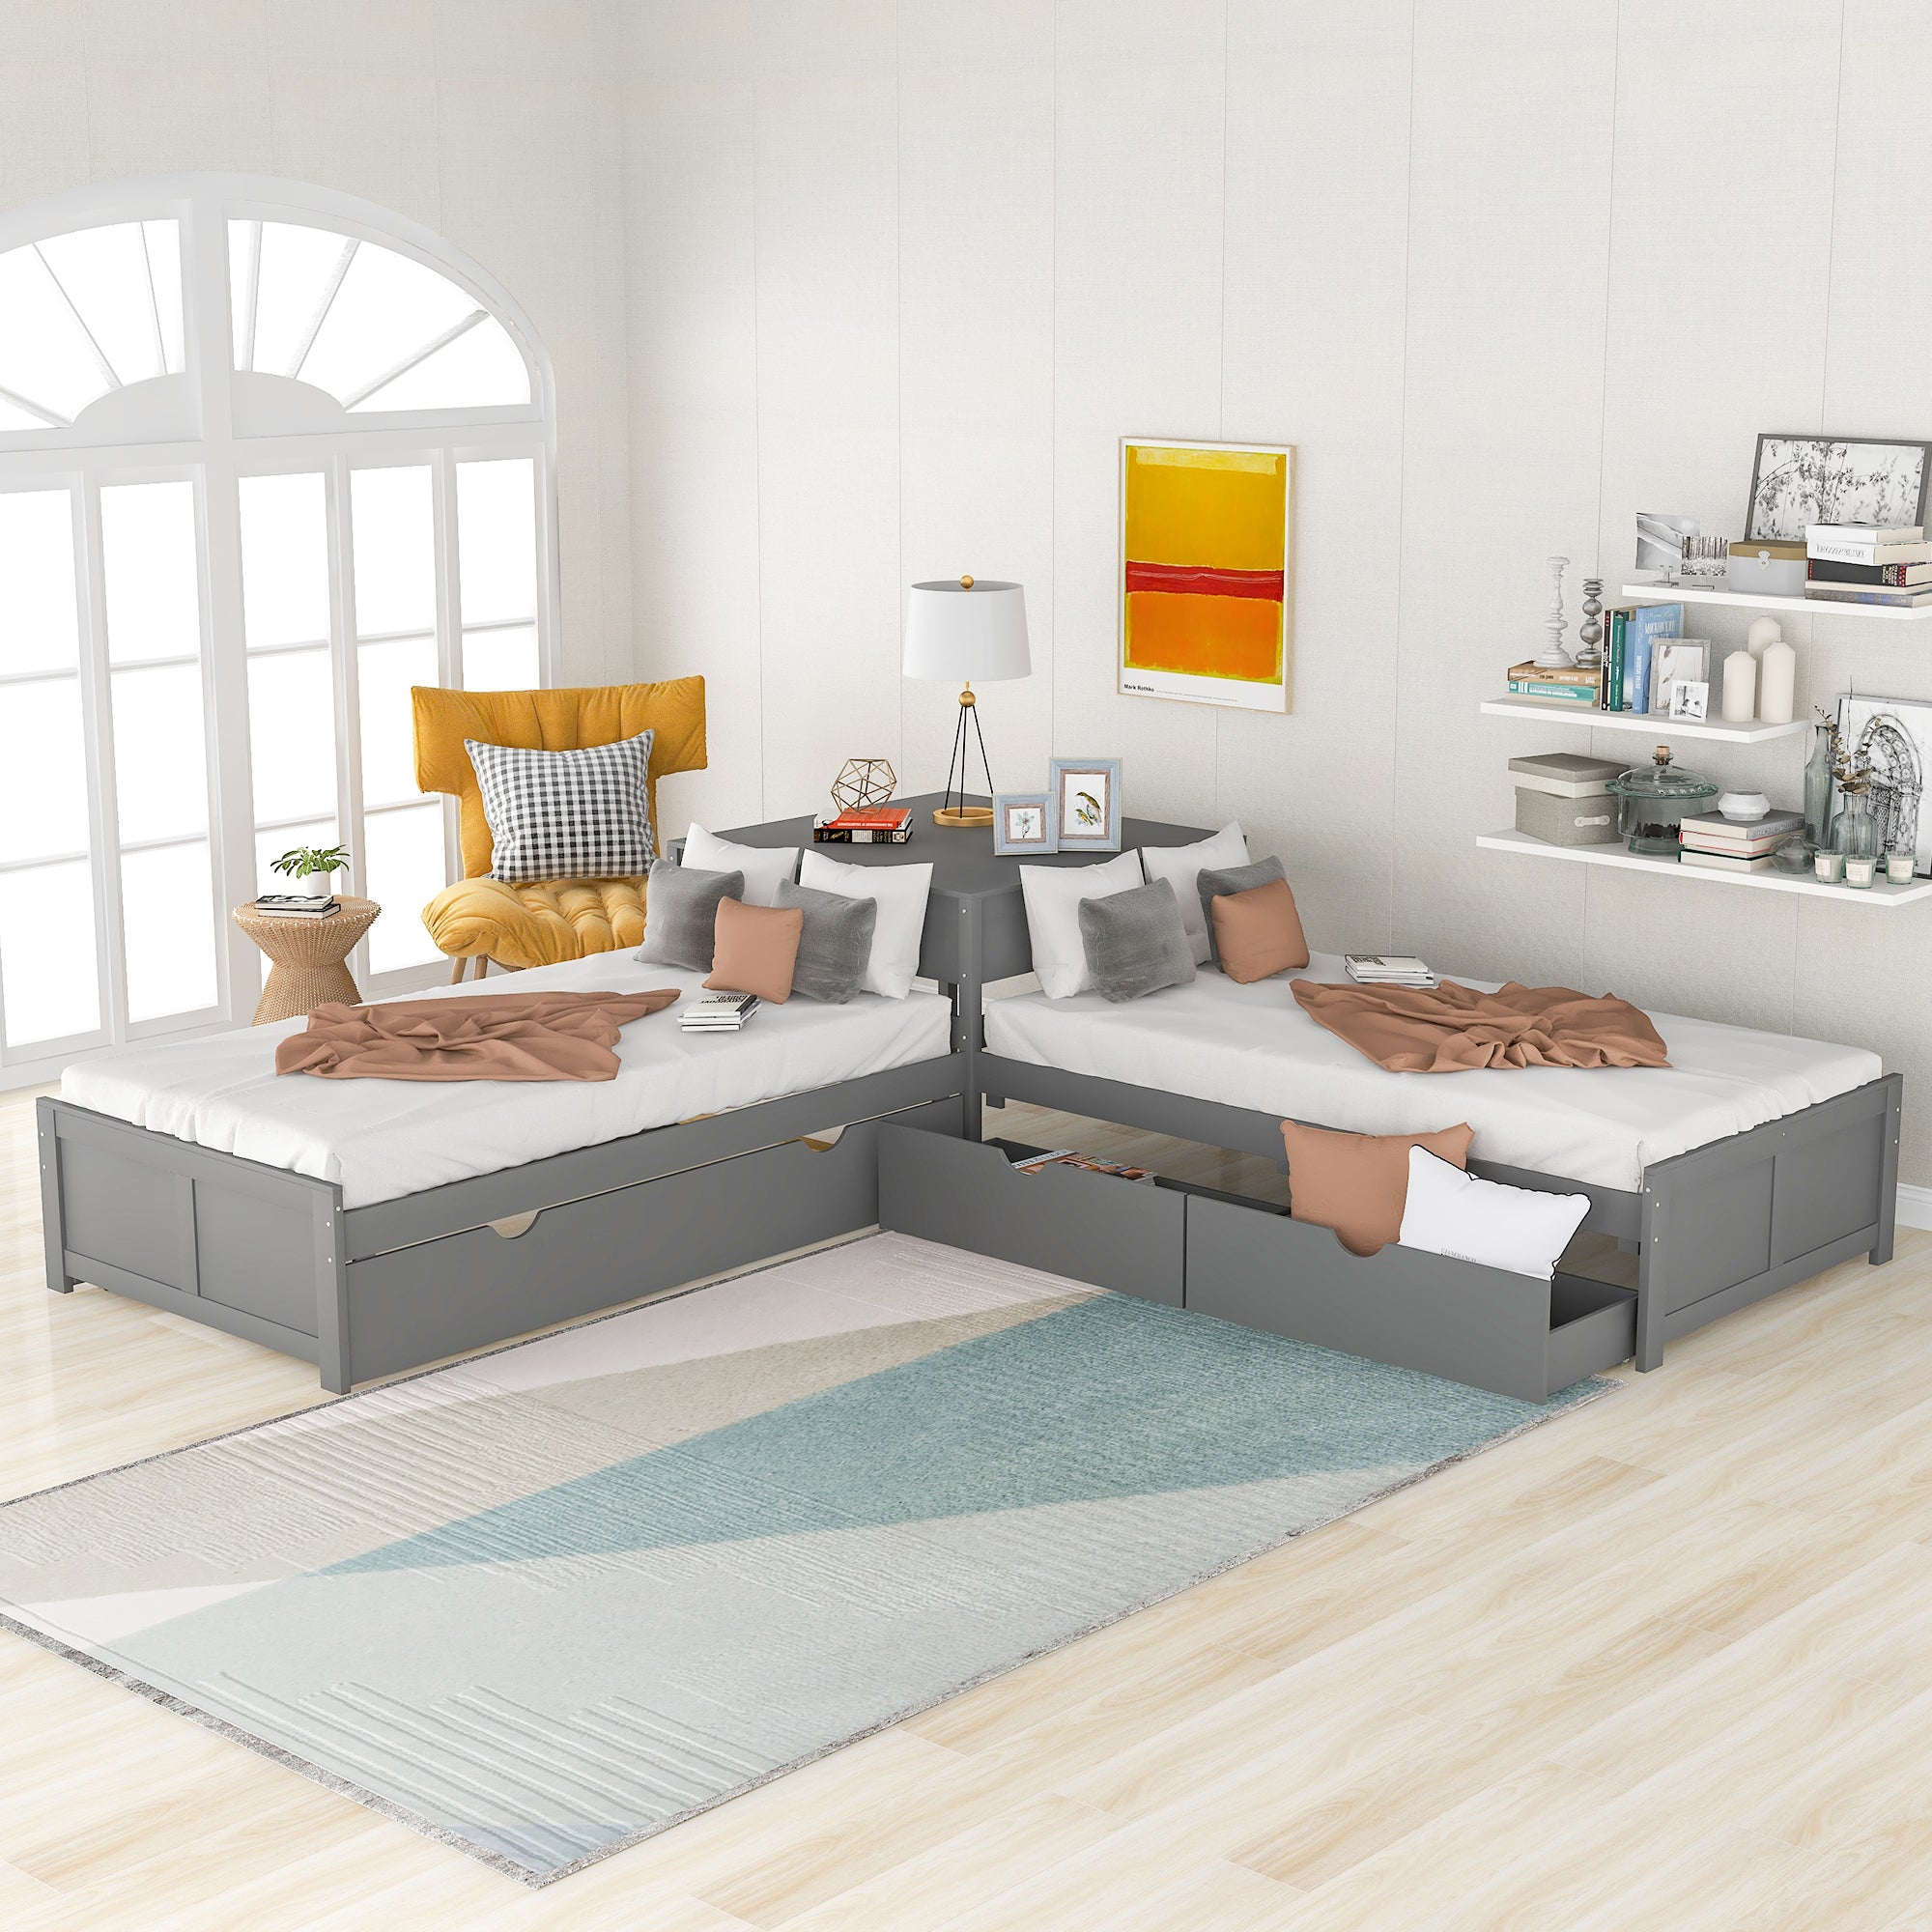 L-shaped Platform Bed with Trundle and Drawers Linked with built-in Desk (Gray)